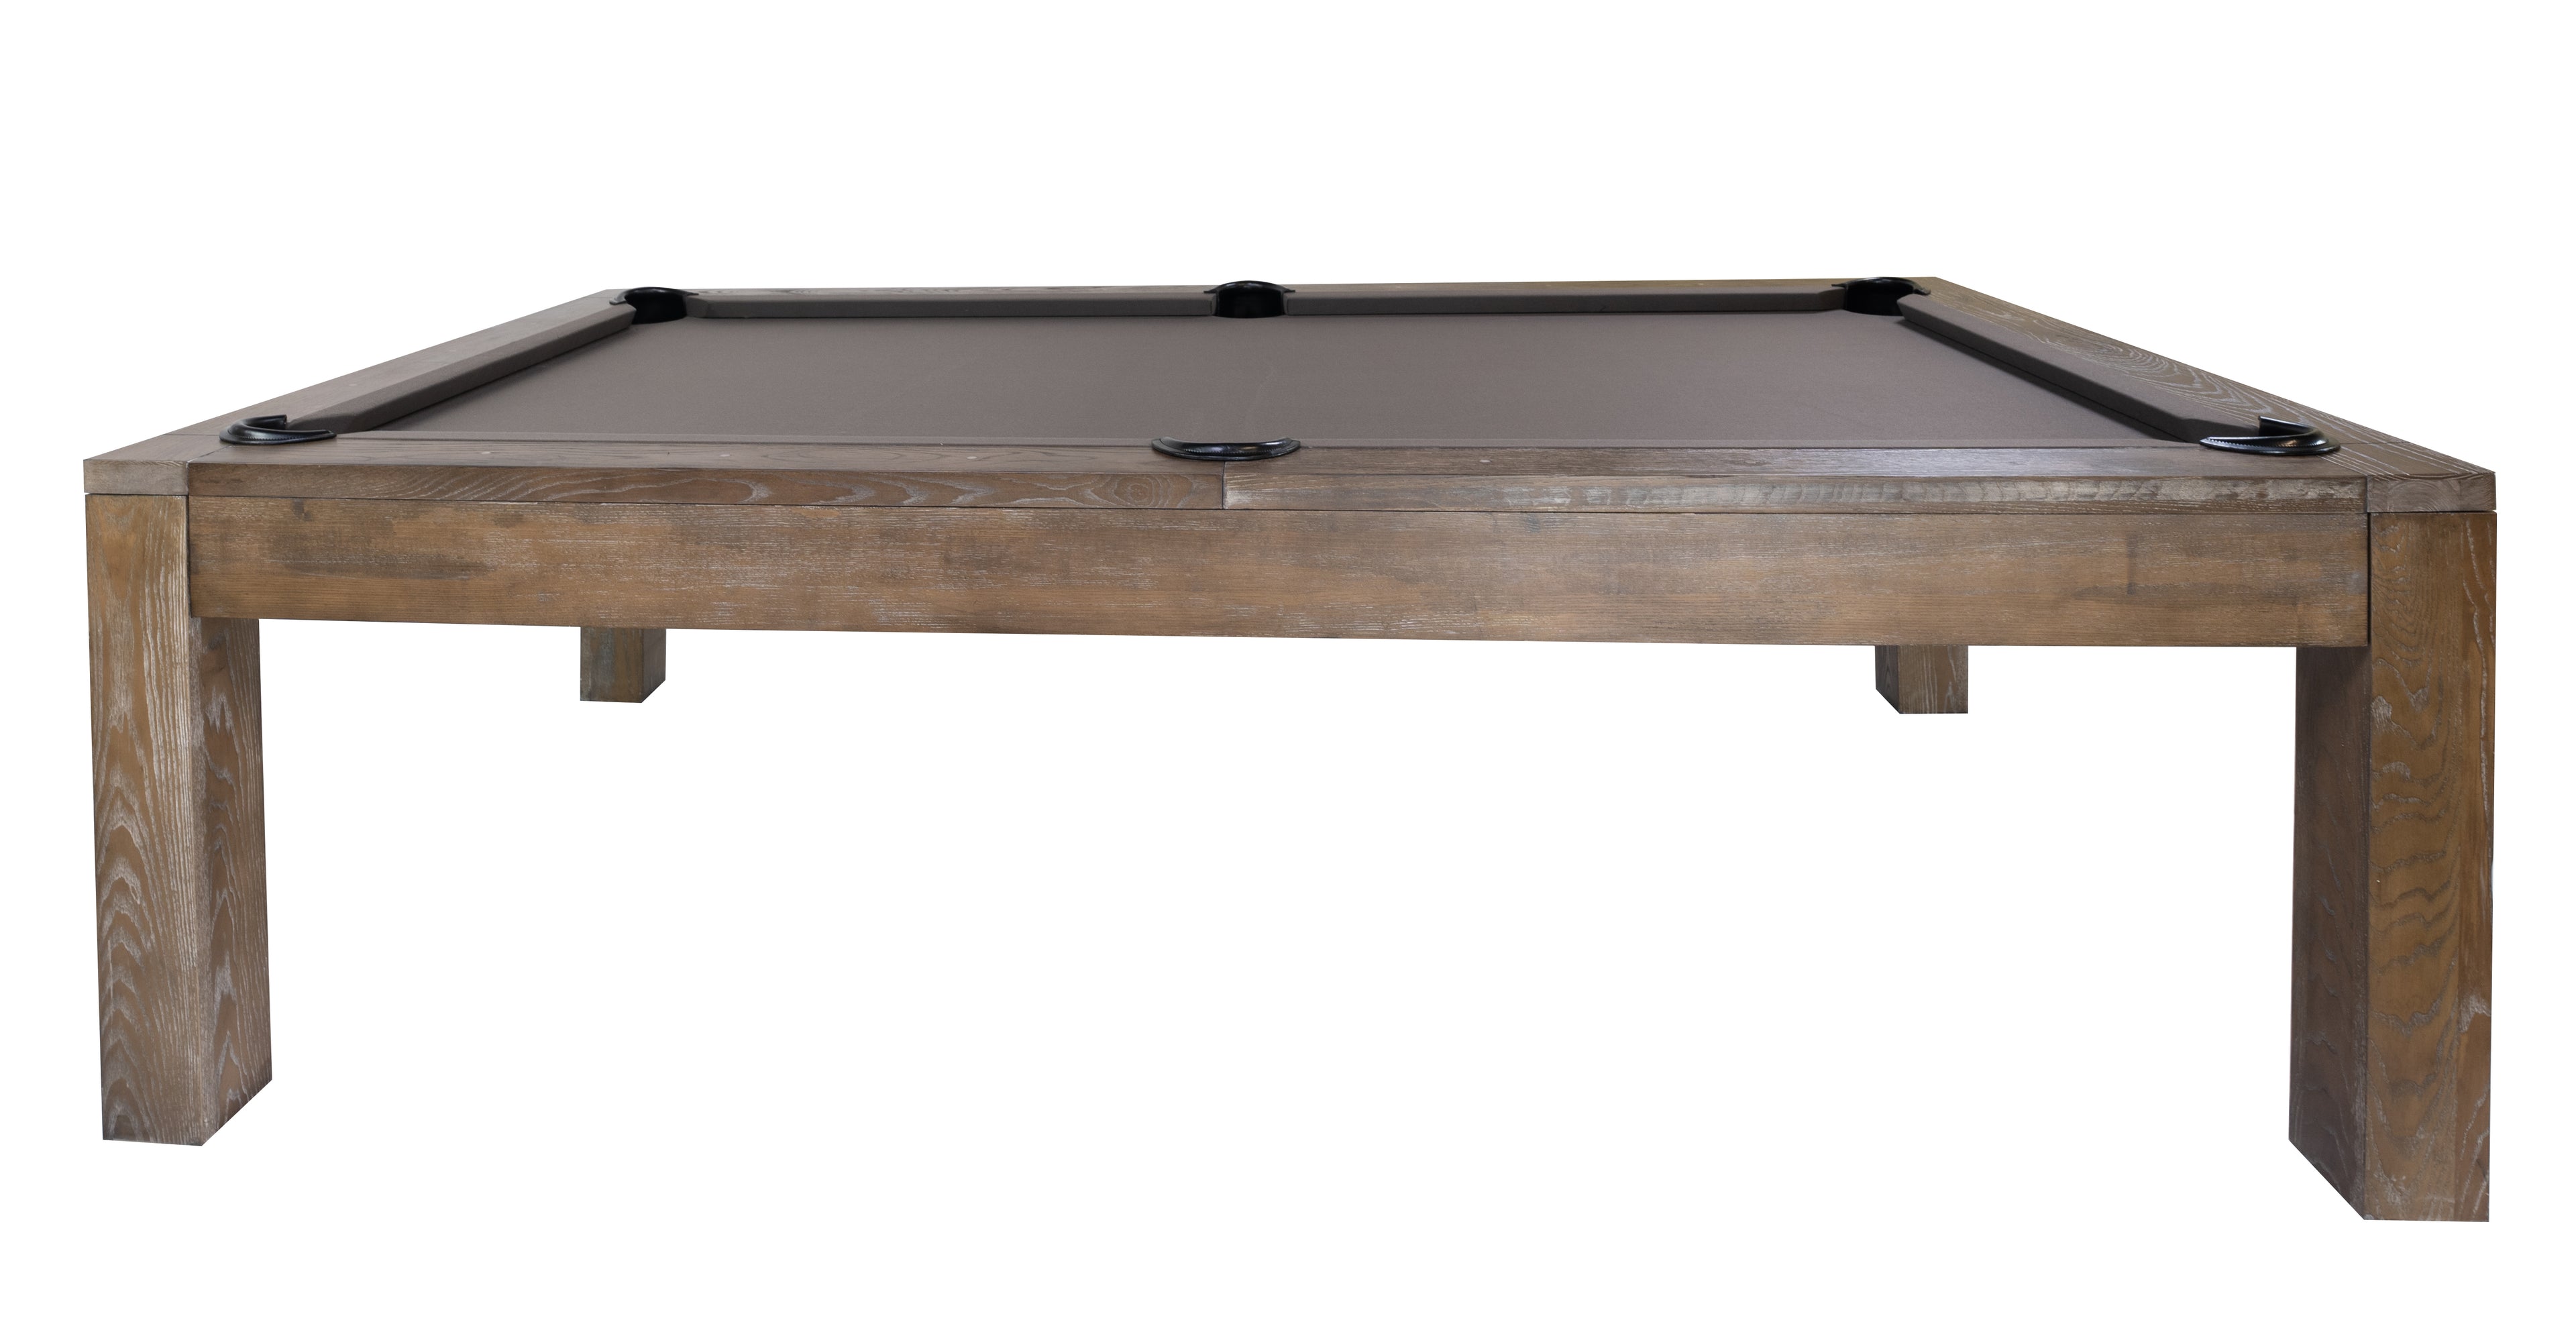 Legacy Billiards 8 Ft Baylor II Pool Table in Smoke Finish with Grey Cloth Side View